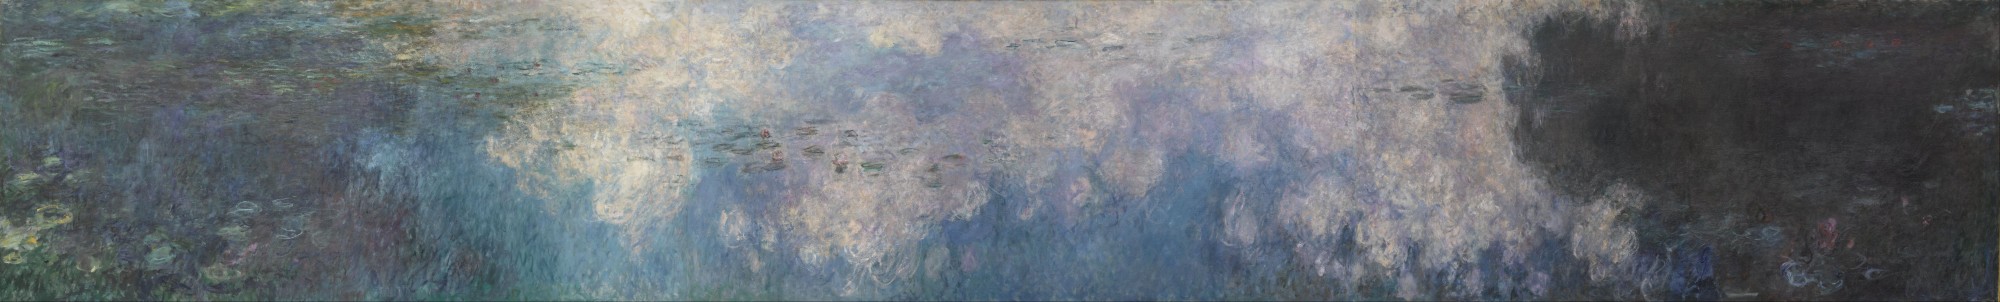 Claude Monet - The Water Lilies - The Clouds - Google Art Project